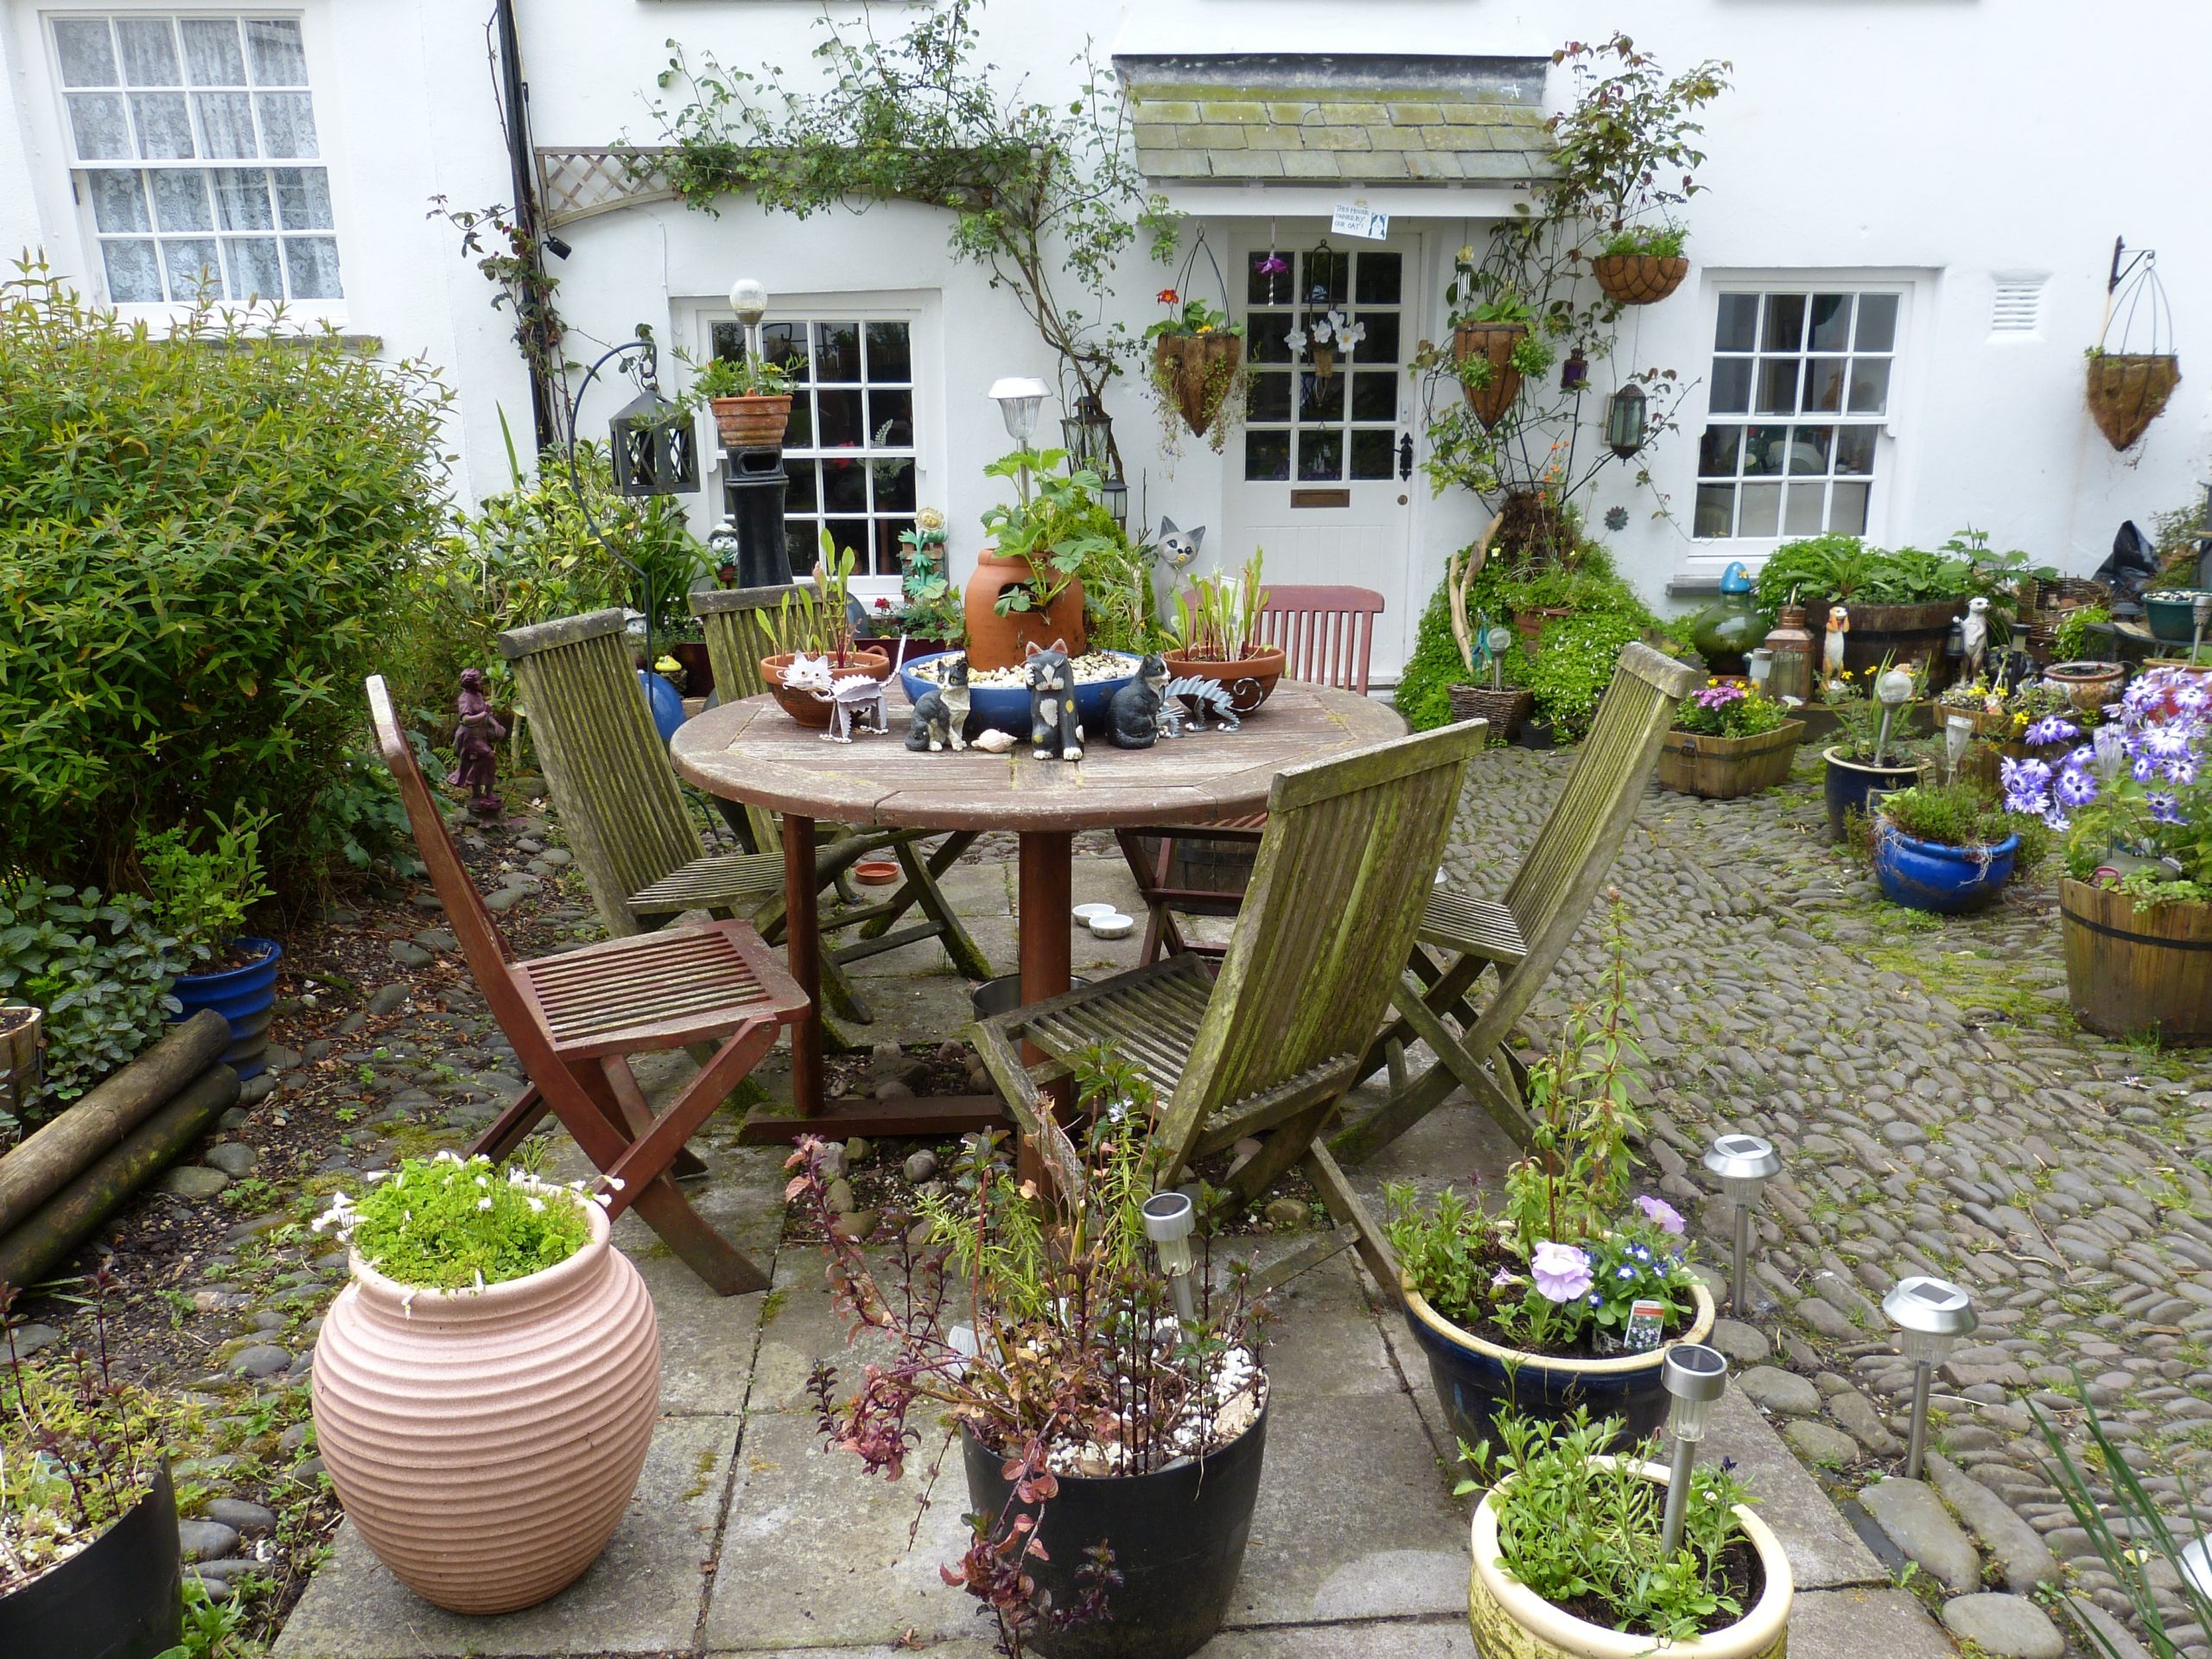 Cottage with table and chairs surrounded by potted plants